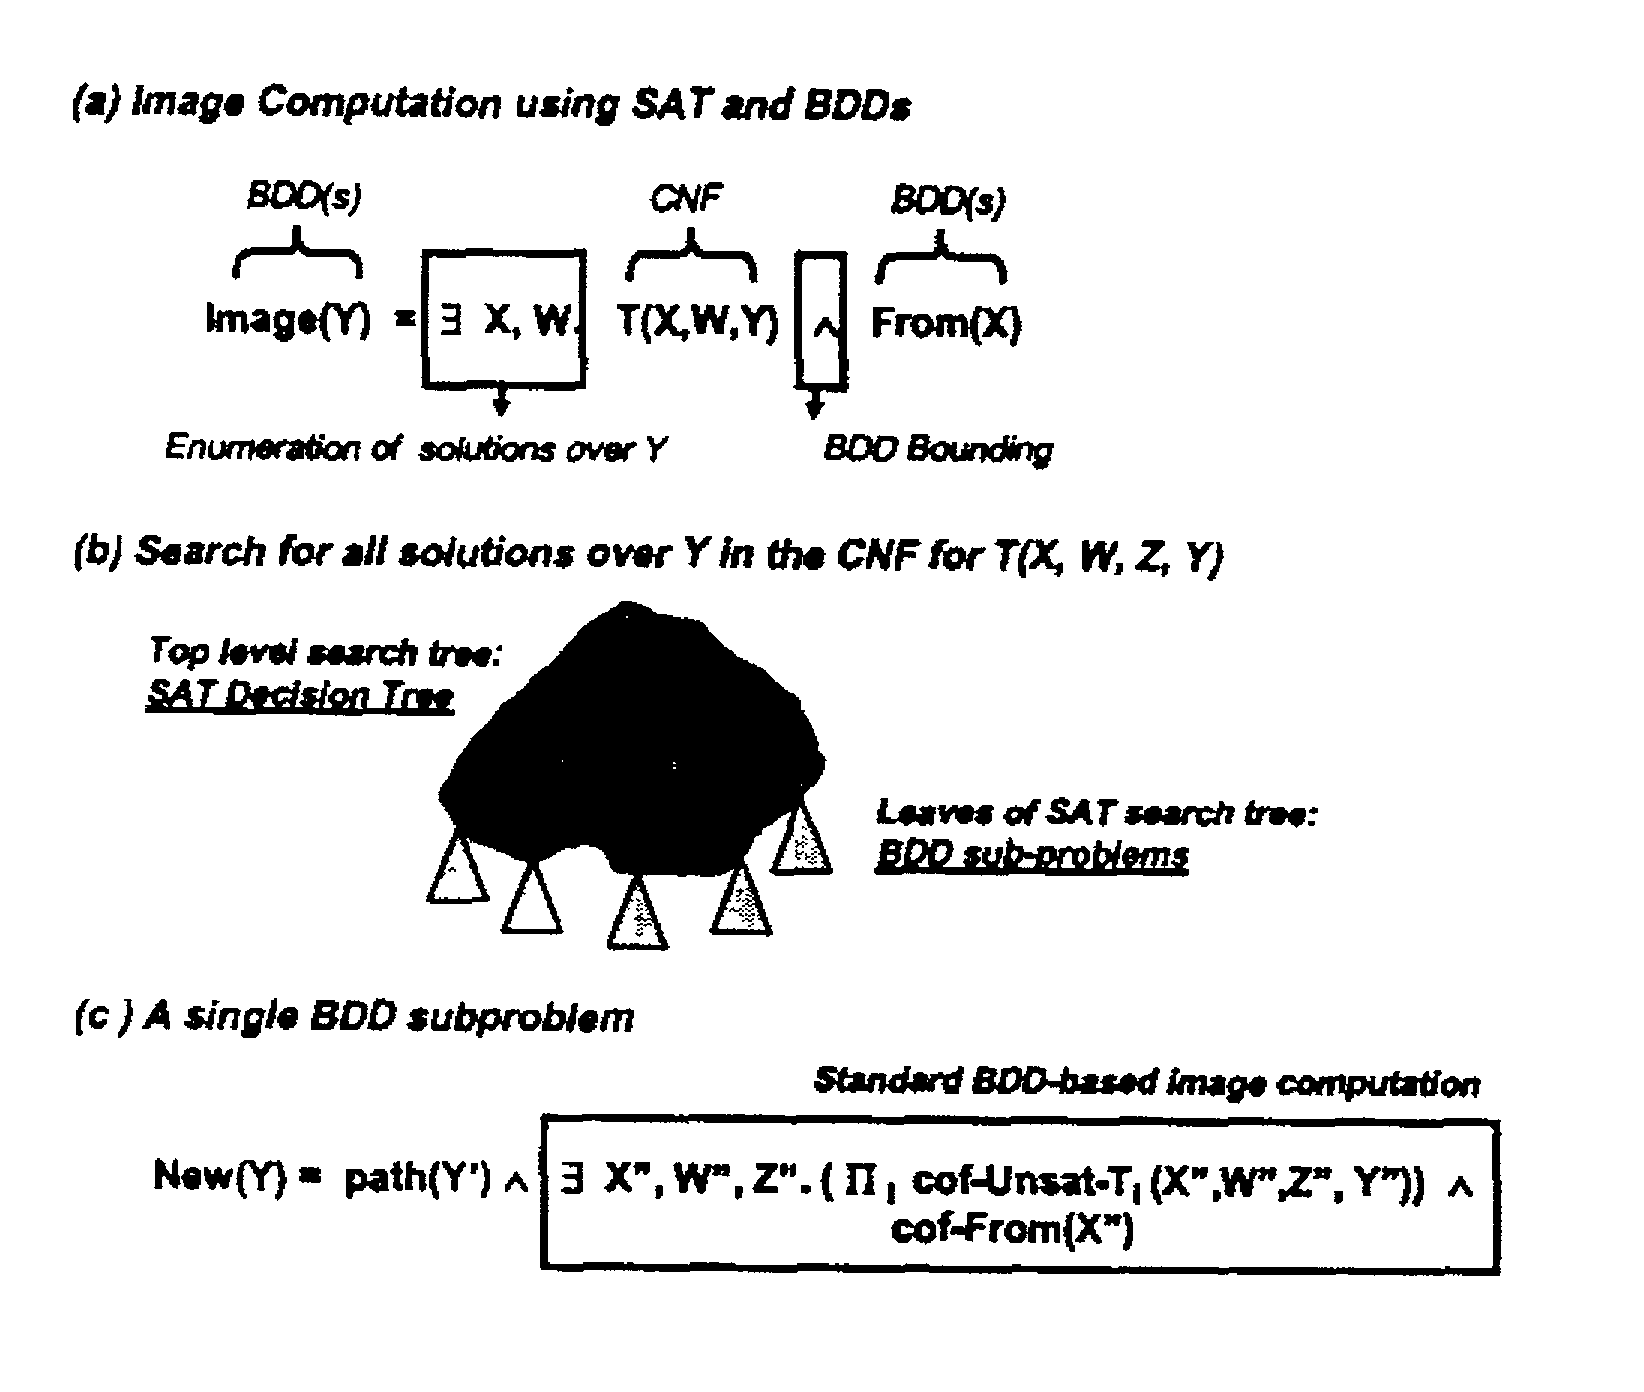 Partition-based decision heuristics for SAT and image computation using SAT and BDDs